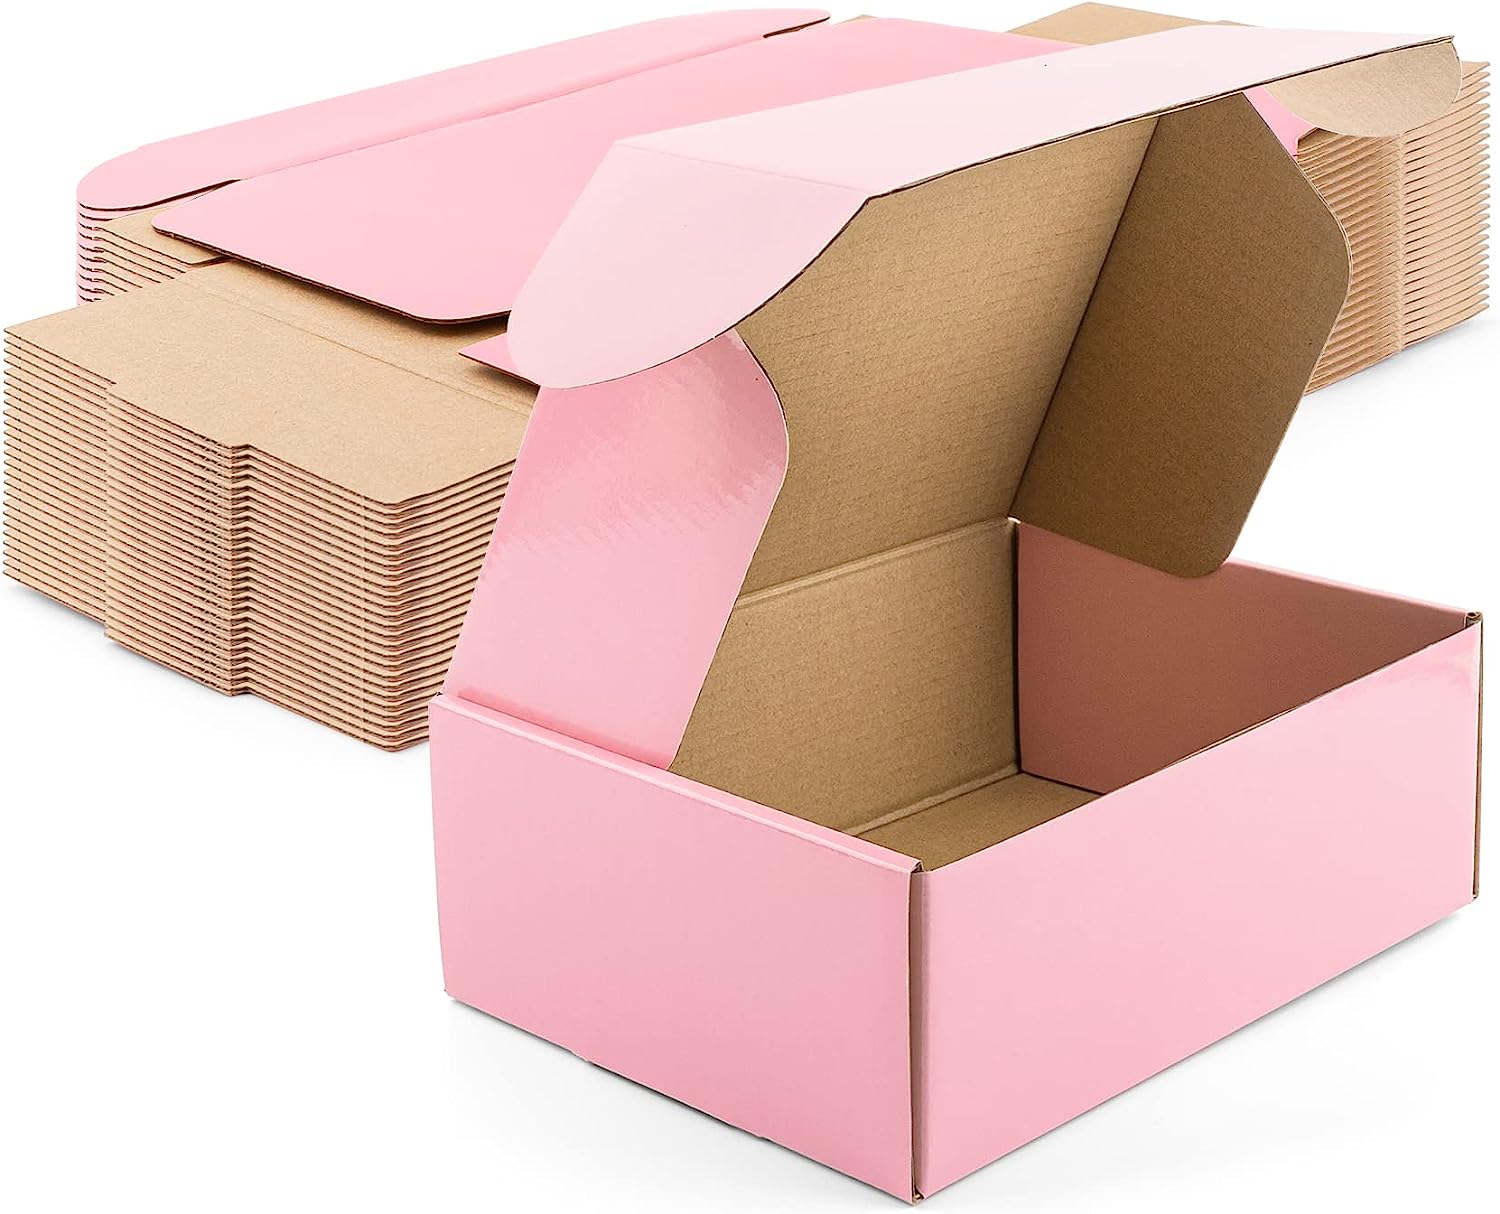  Soxuding Pink Shipping Boxes 6x6x2in - Pack of 20